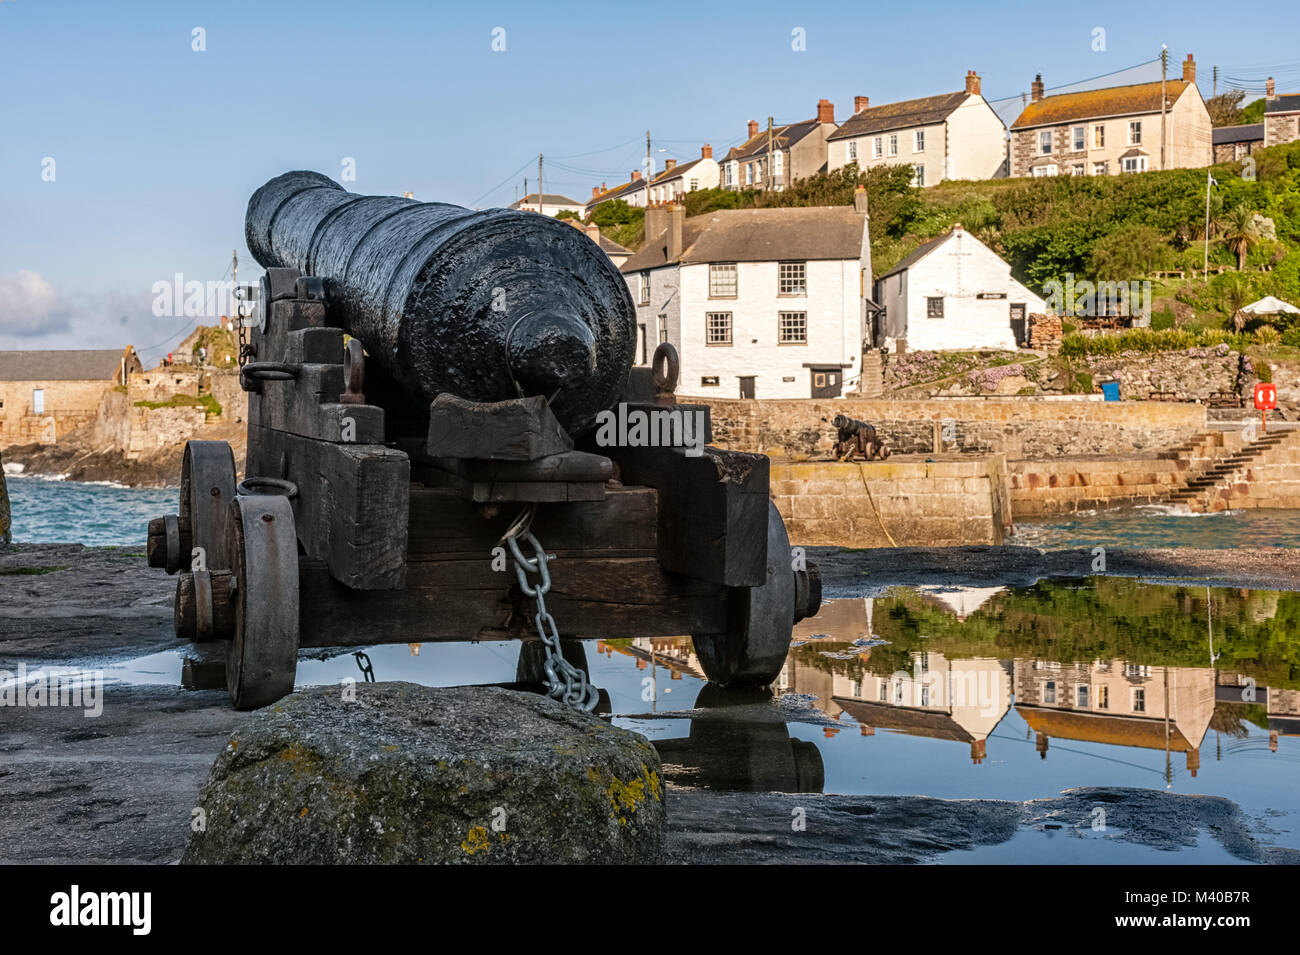 PORTHLEVEN, CORNWALL, UK - JUNE 10, 2009:  Old Naval gun on the Harbour walls with view of the village in the background Stock Photo